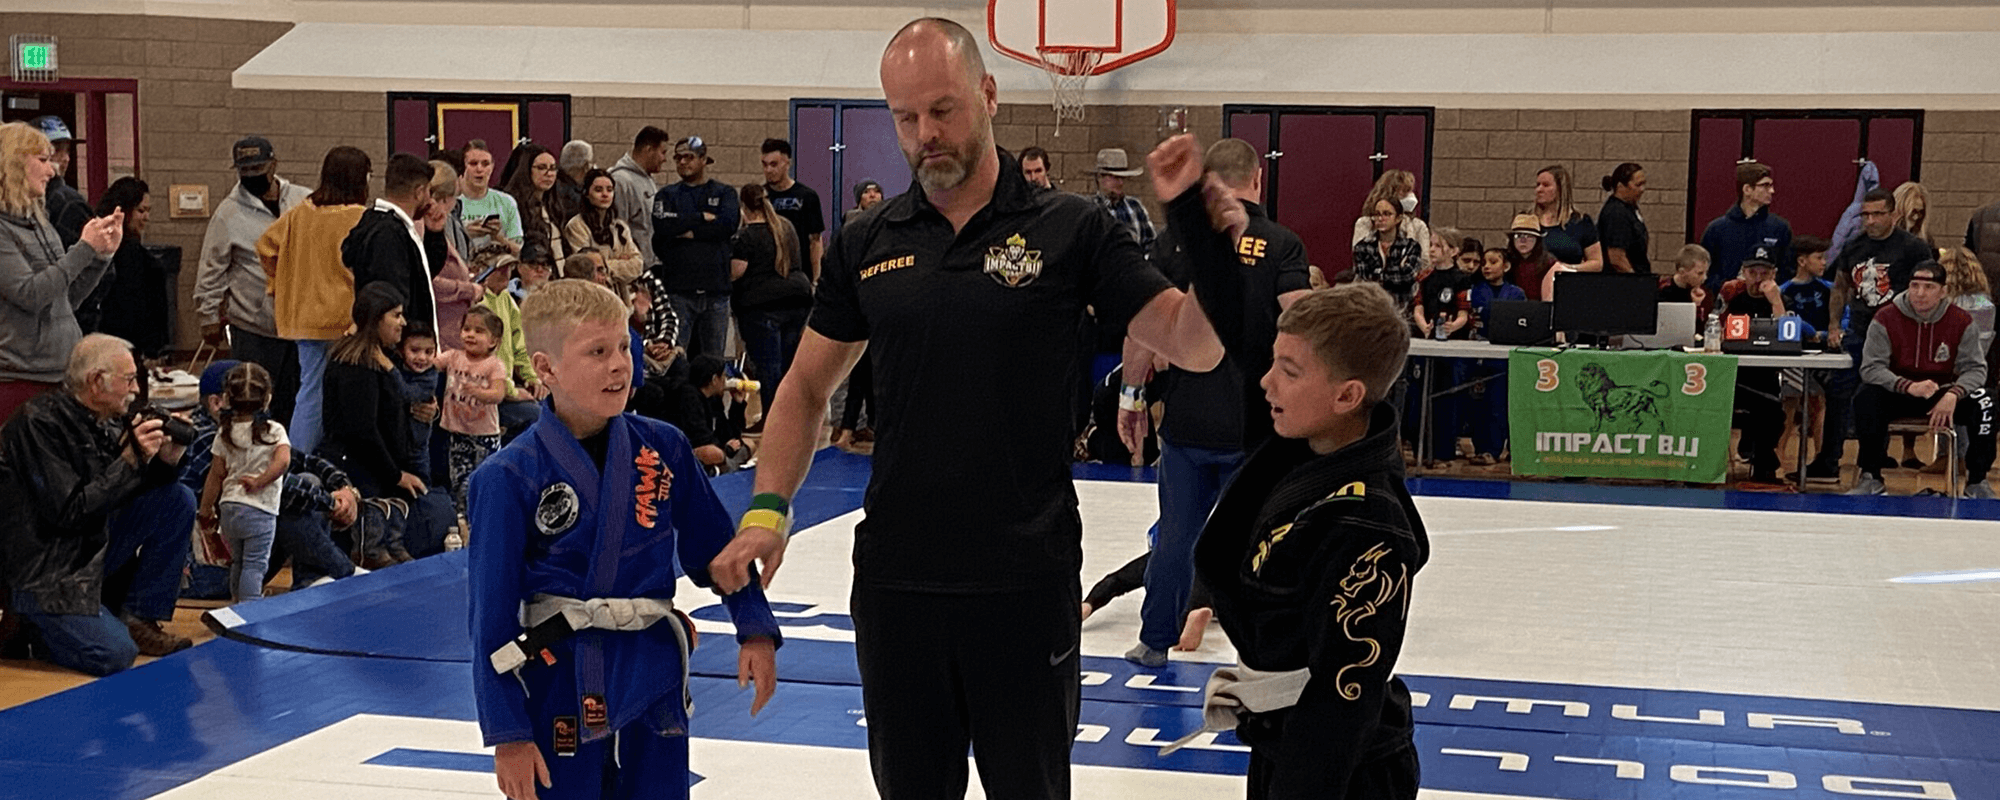 How Children Benefit from Losing in a Jiu-Jitsu Competition